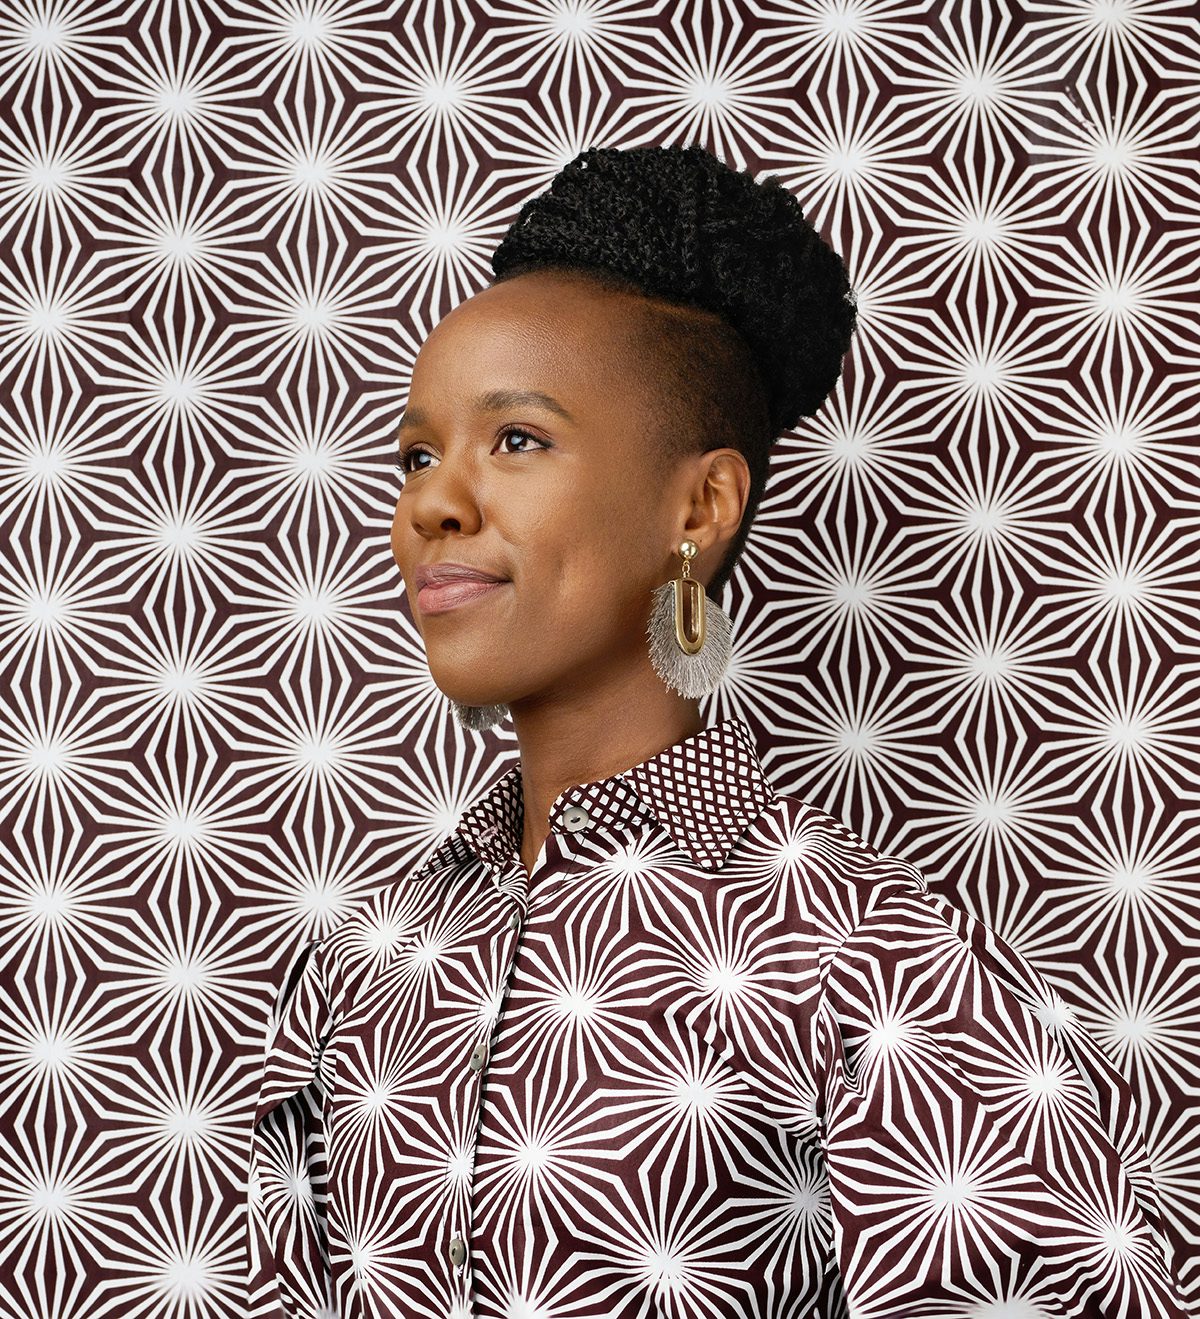 A woman wearing a garment in a maroon and white starburst pattern, which blends into a backdrop in the same pattern